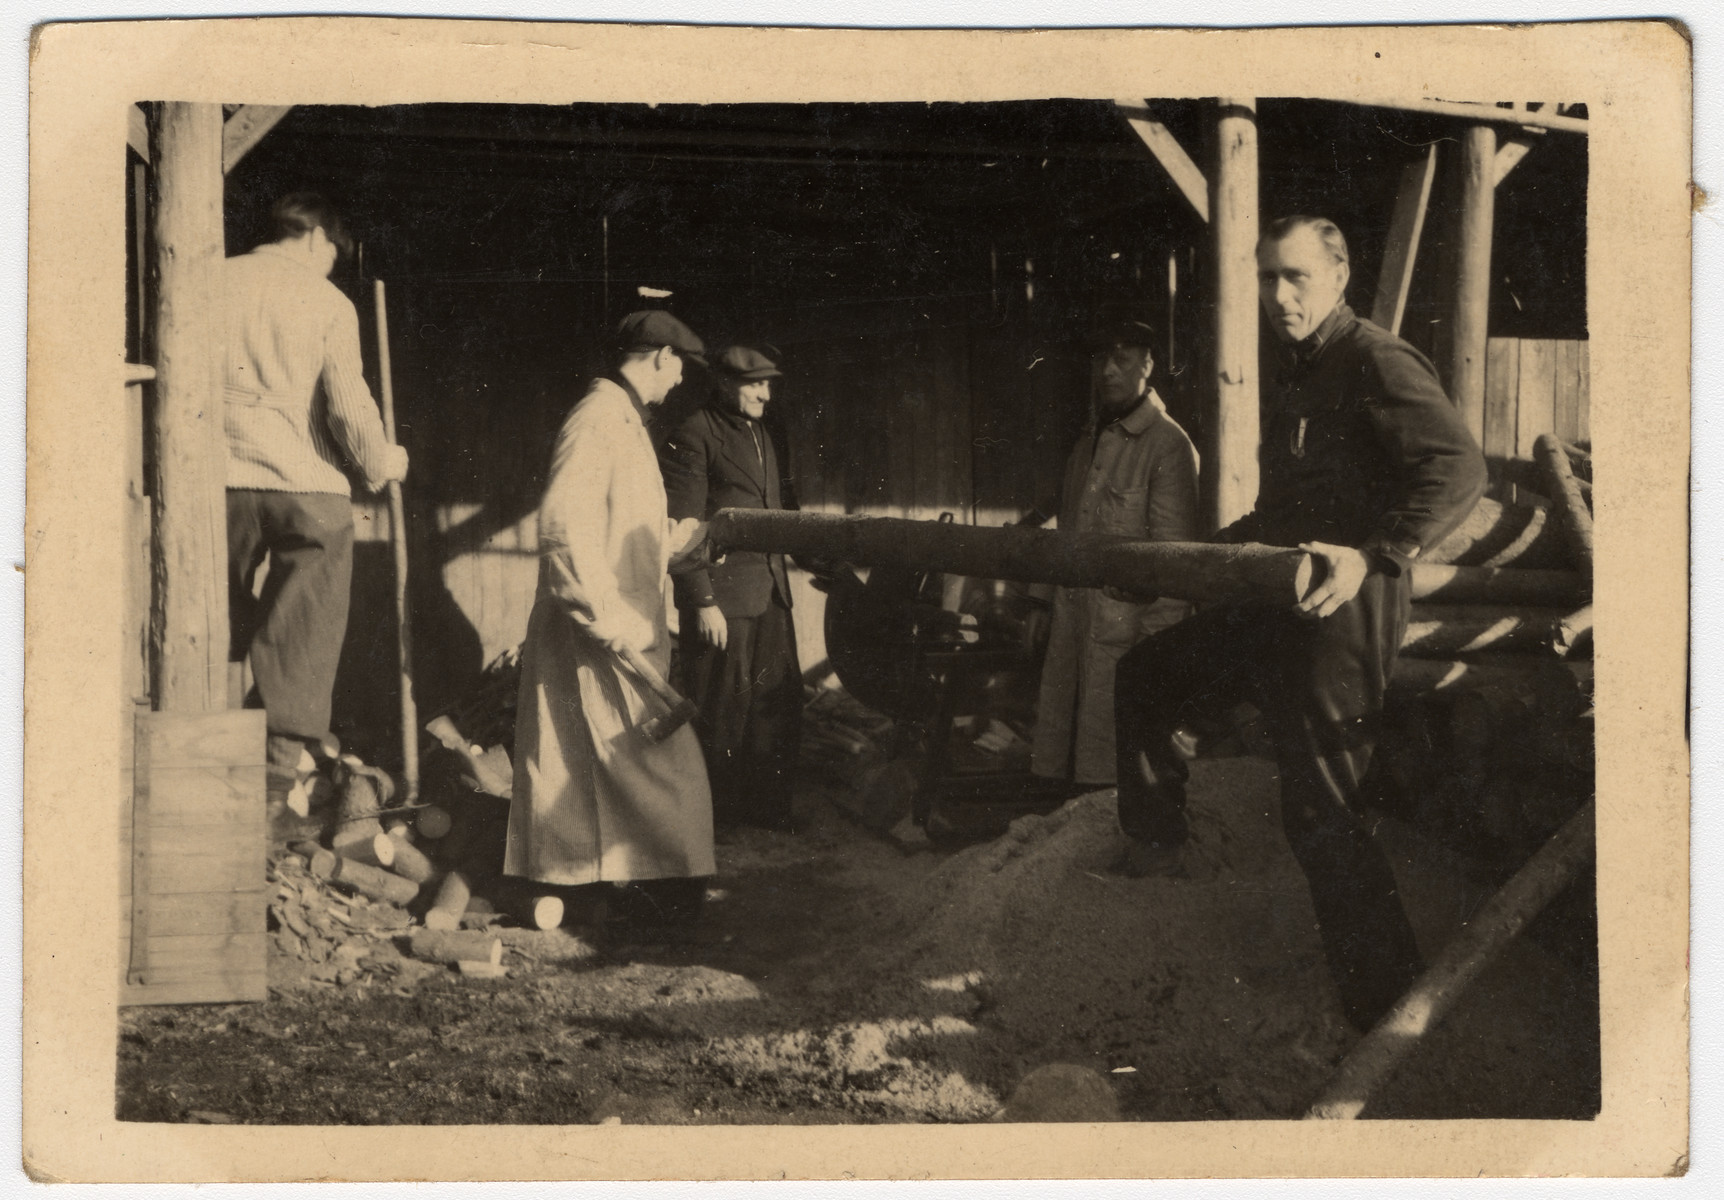 A group of men work in a lumber workshop, perhaps affiliated with a sanatorium.

The original Czech caption reads, "As a memento from Sanatorium, Buda and Zasmok."